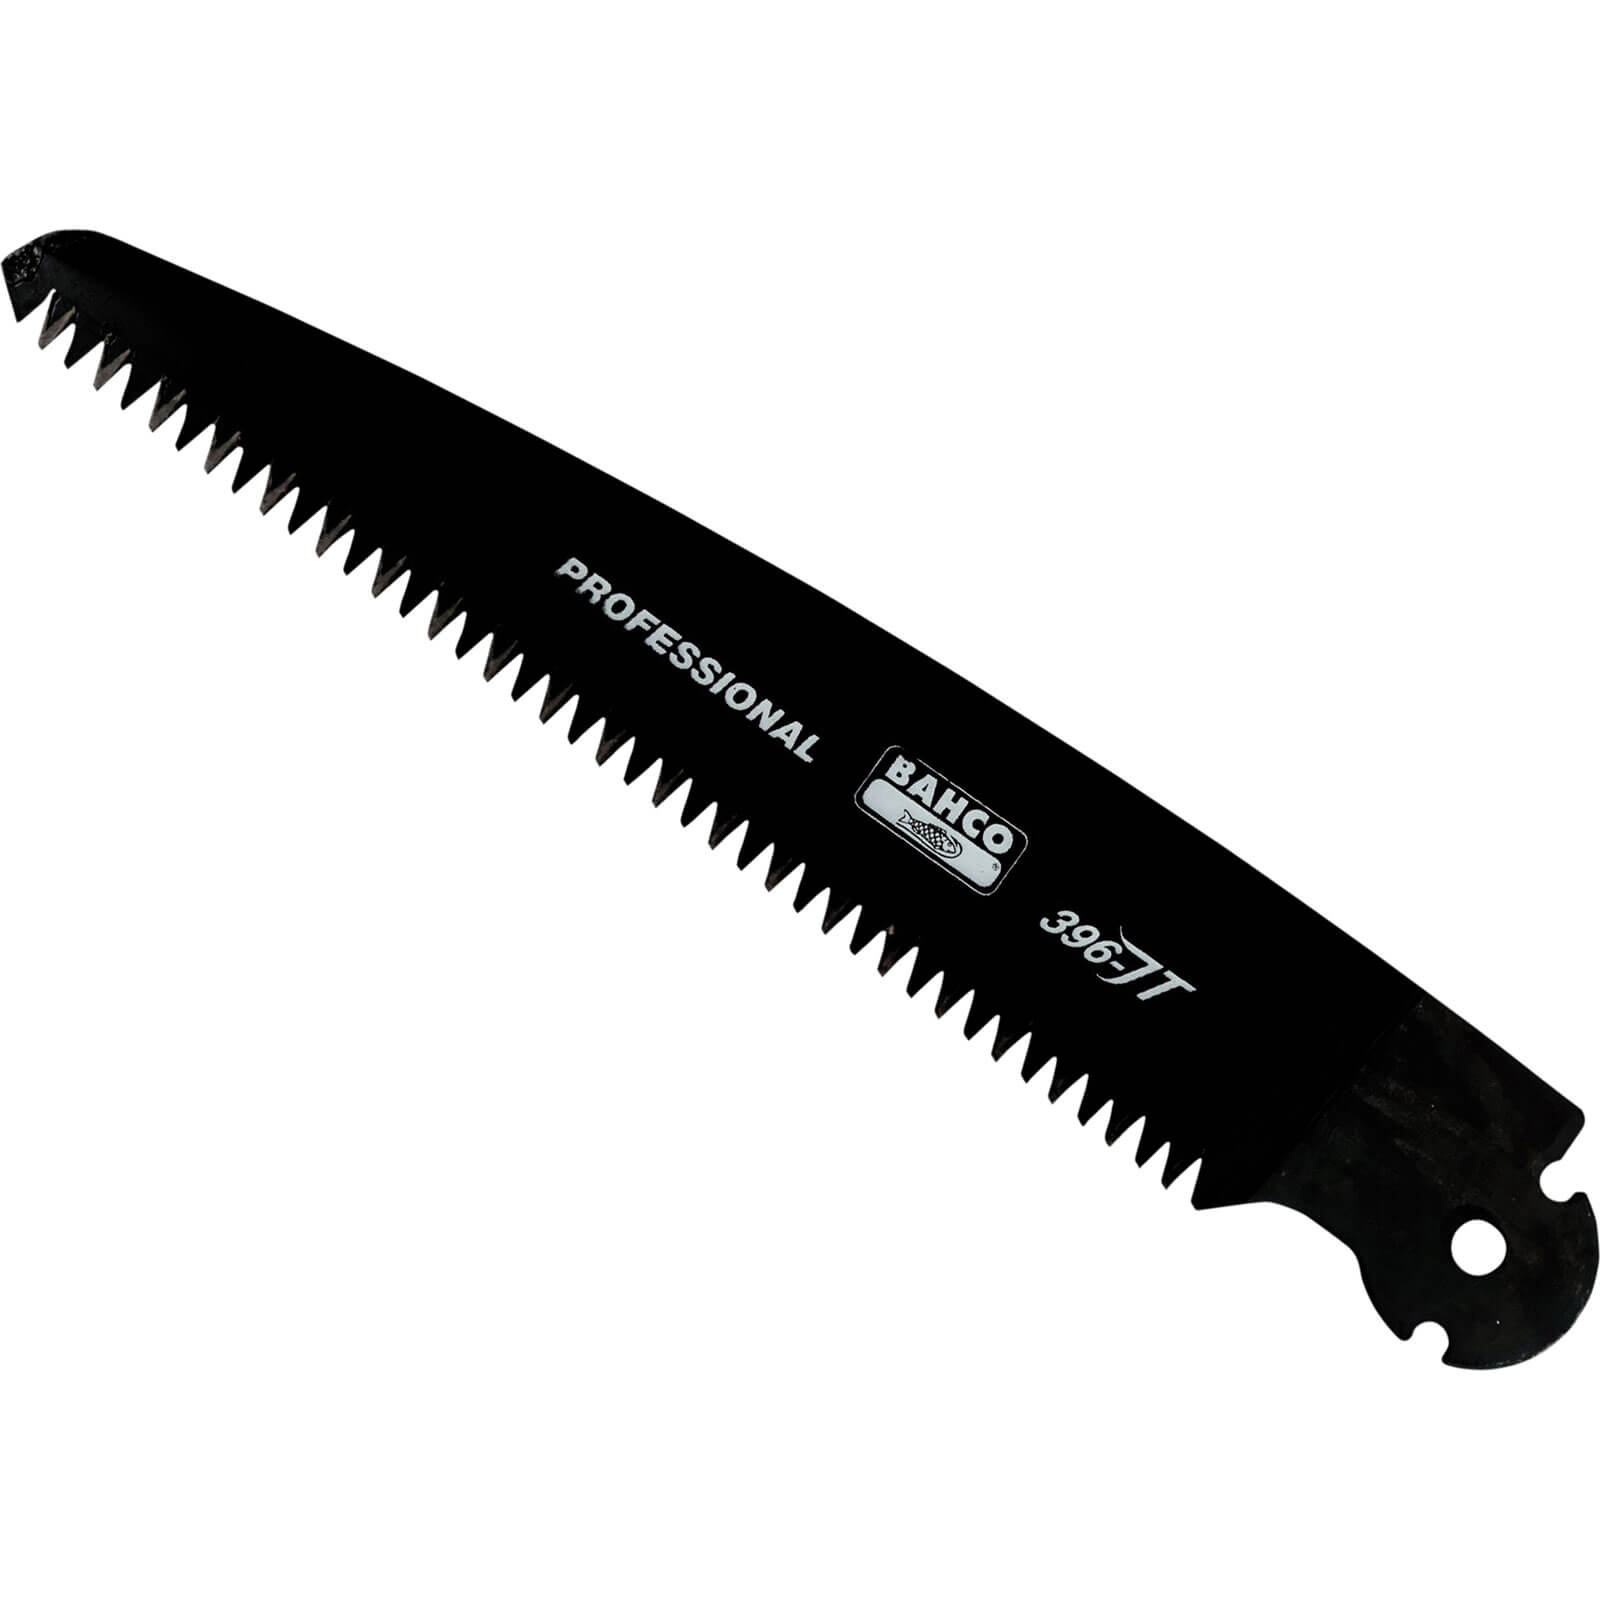 Photos - Jigsaw Blade Bahco Replacement Blade for 396 JT Pruning Saw 396JTBLAD 